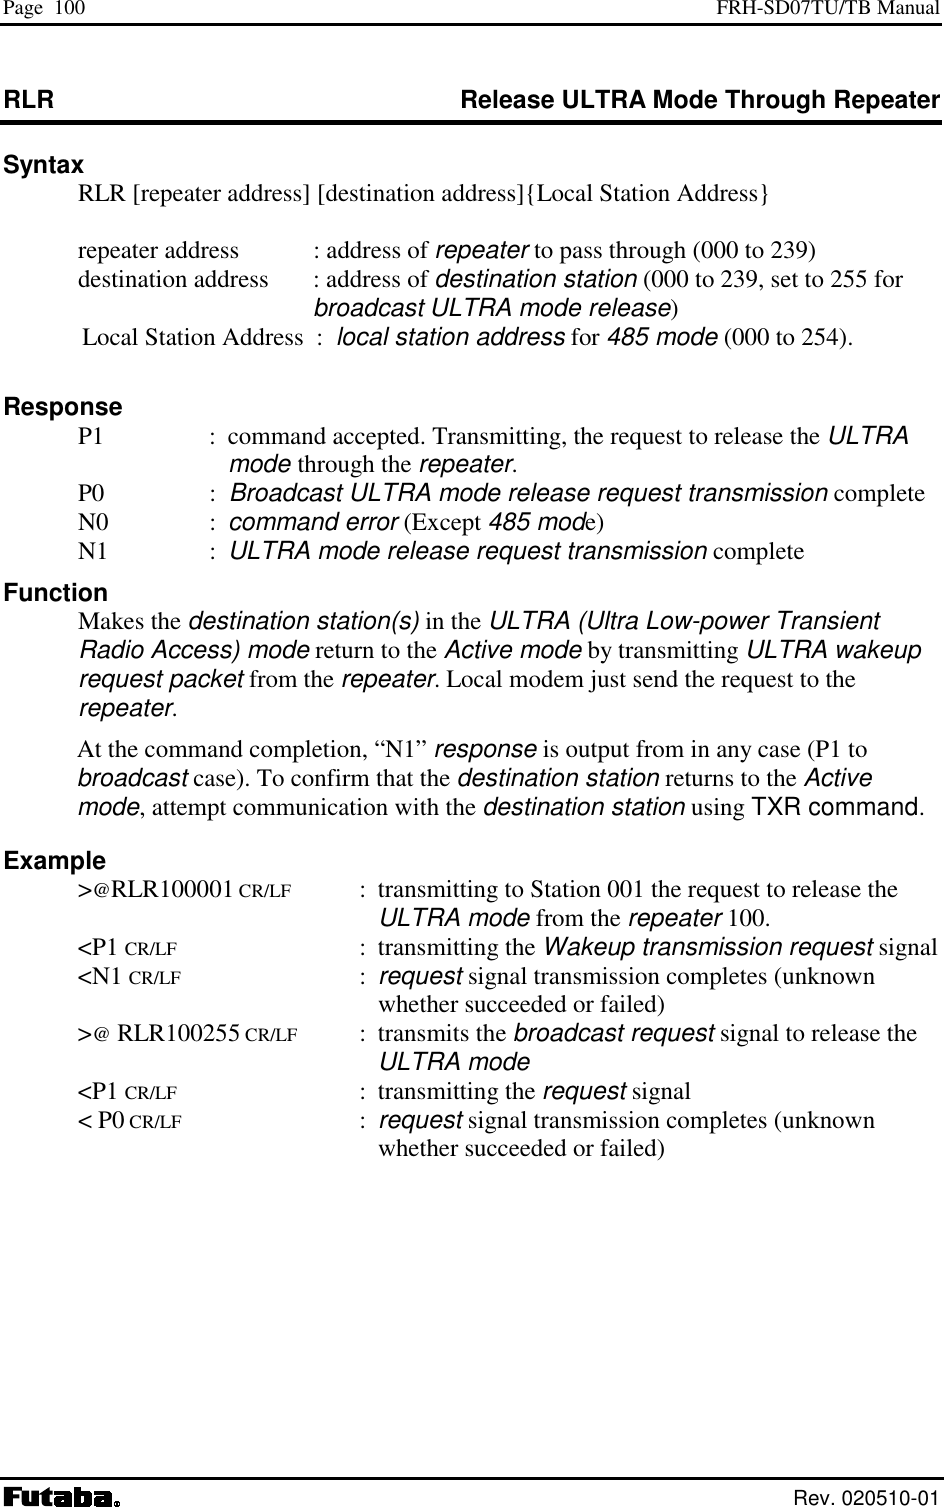 Page  100  FRH-SD07TU/TB Manual  Rev. 020510-01 RLR  Release ULTRA Mode Through Repeater Syntax   RLR [repeater address] [destination address]{Local Station Address}    repeater address   : address of repeater to pass through (000 to 239)    destination address  : address of destination station (000 to 239, set to 255 for broadcast ULTRA mode release)  Local Station Address  :  local station address for 485 mode (000 to 254).  Response   P1  :  command accepted. Transmitting, the request to release the ULTRA mode through the repeater.  P0  :  Broadcast ULTRA mode release request transmission complete  N0  : command error (Except 485 mode)  N1  : ULTRA mode release request transmission complete Function  Makes the destination station(s) in the ULTRA (Ultra Low-power Transient Radio Access) mode return to the Active mode by transmitting ULTRA wakeup request packet from the repeater. Local modem just send the request to the repeater. At the command completion, “N1” response is output from in any case (P1 to broadcast case). To confirm that the destination station returns to the Active mode, attempt communication with the destination station using TXR command.   Example  &gt;@RLR100001 CR/LF  :  transmitting to Station 001 the request to release the ULTRA mode from the repeater 100.  &lt;P1 CR/LF : transmitting the Wakeup transmission request signal  &lt;N1 CR/LF : request signal transmission completes (unknown whether succeeded or failed)  &gt;@ RLR100255 CR/LF : transmits the broadcast request signal to release the ULTRA mode  &lt;P1 CR/LF : transmitting the request signal  &lt; P0 CR/LF : request signal transmission completes (unknown whether succeeded or failed) 